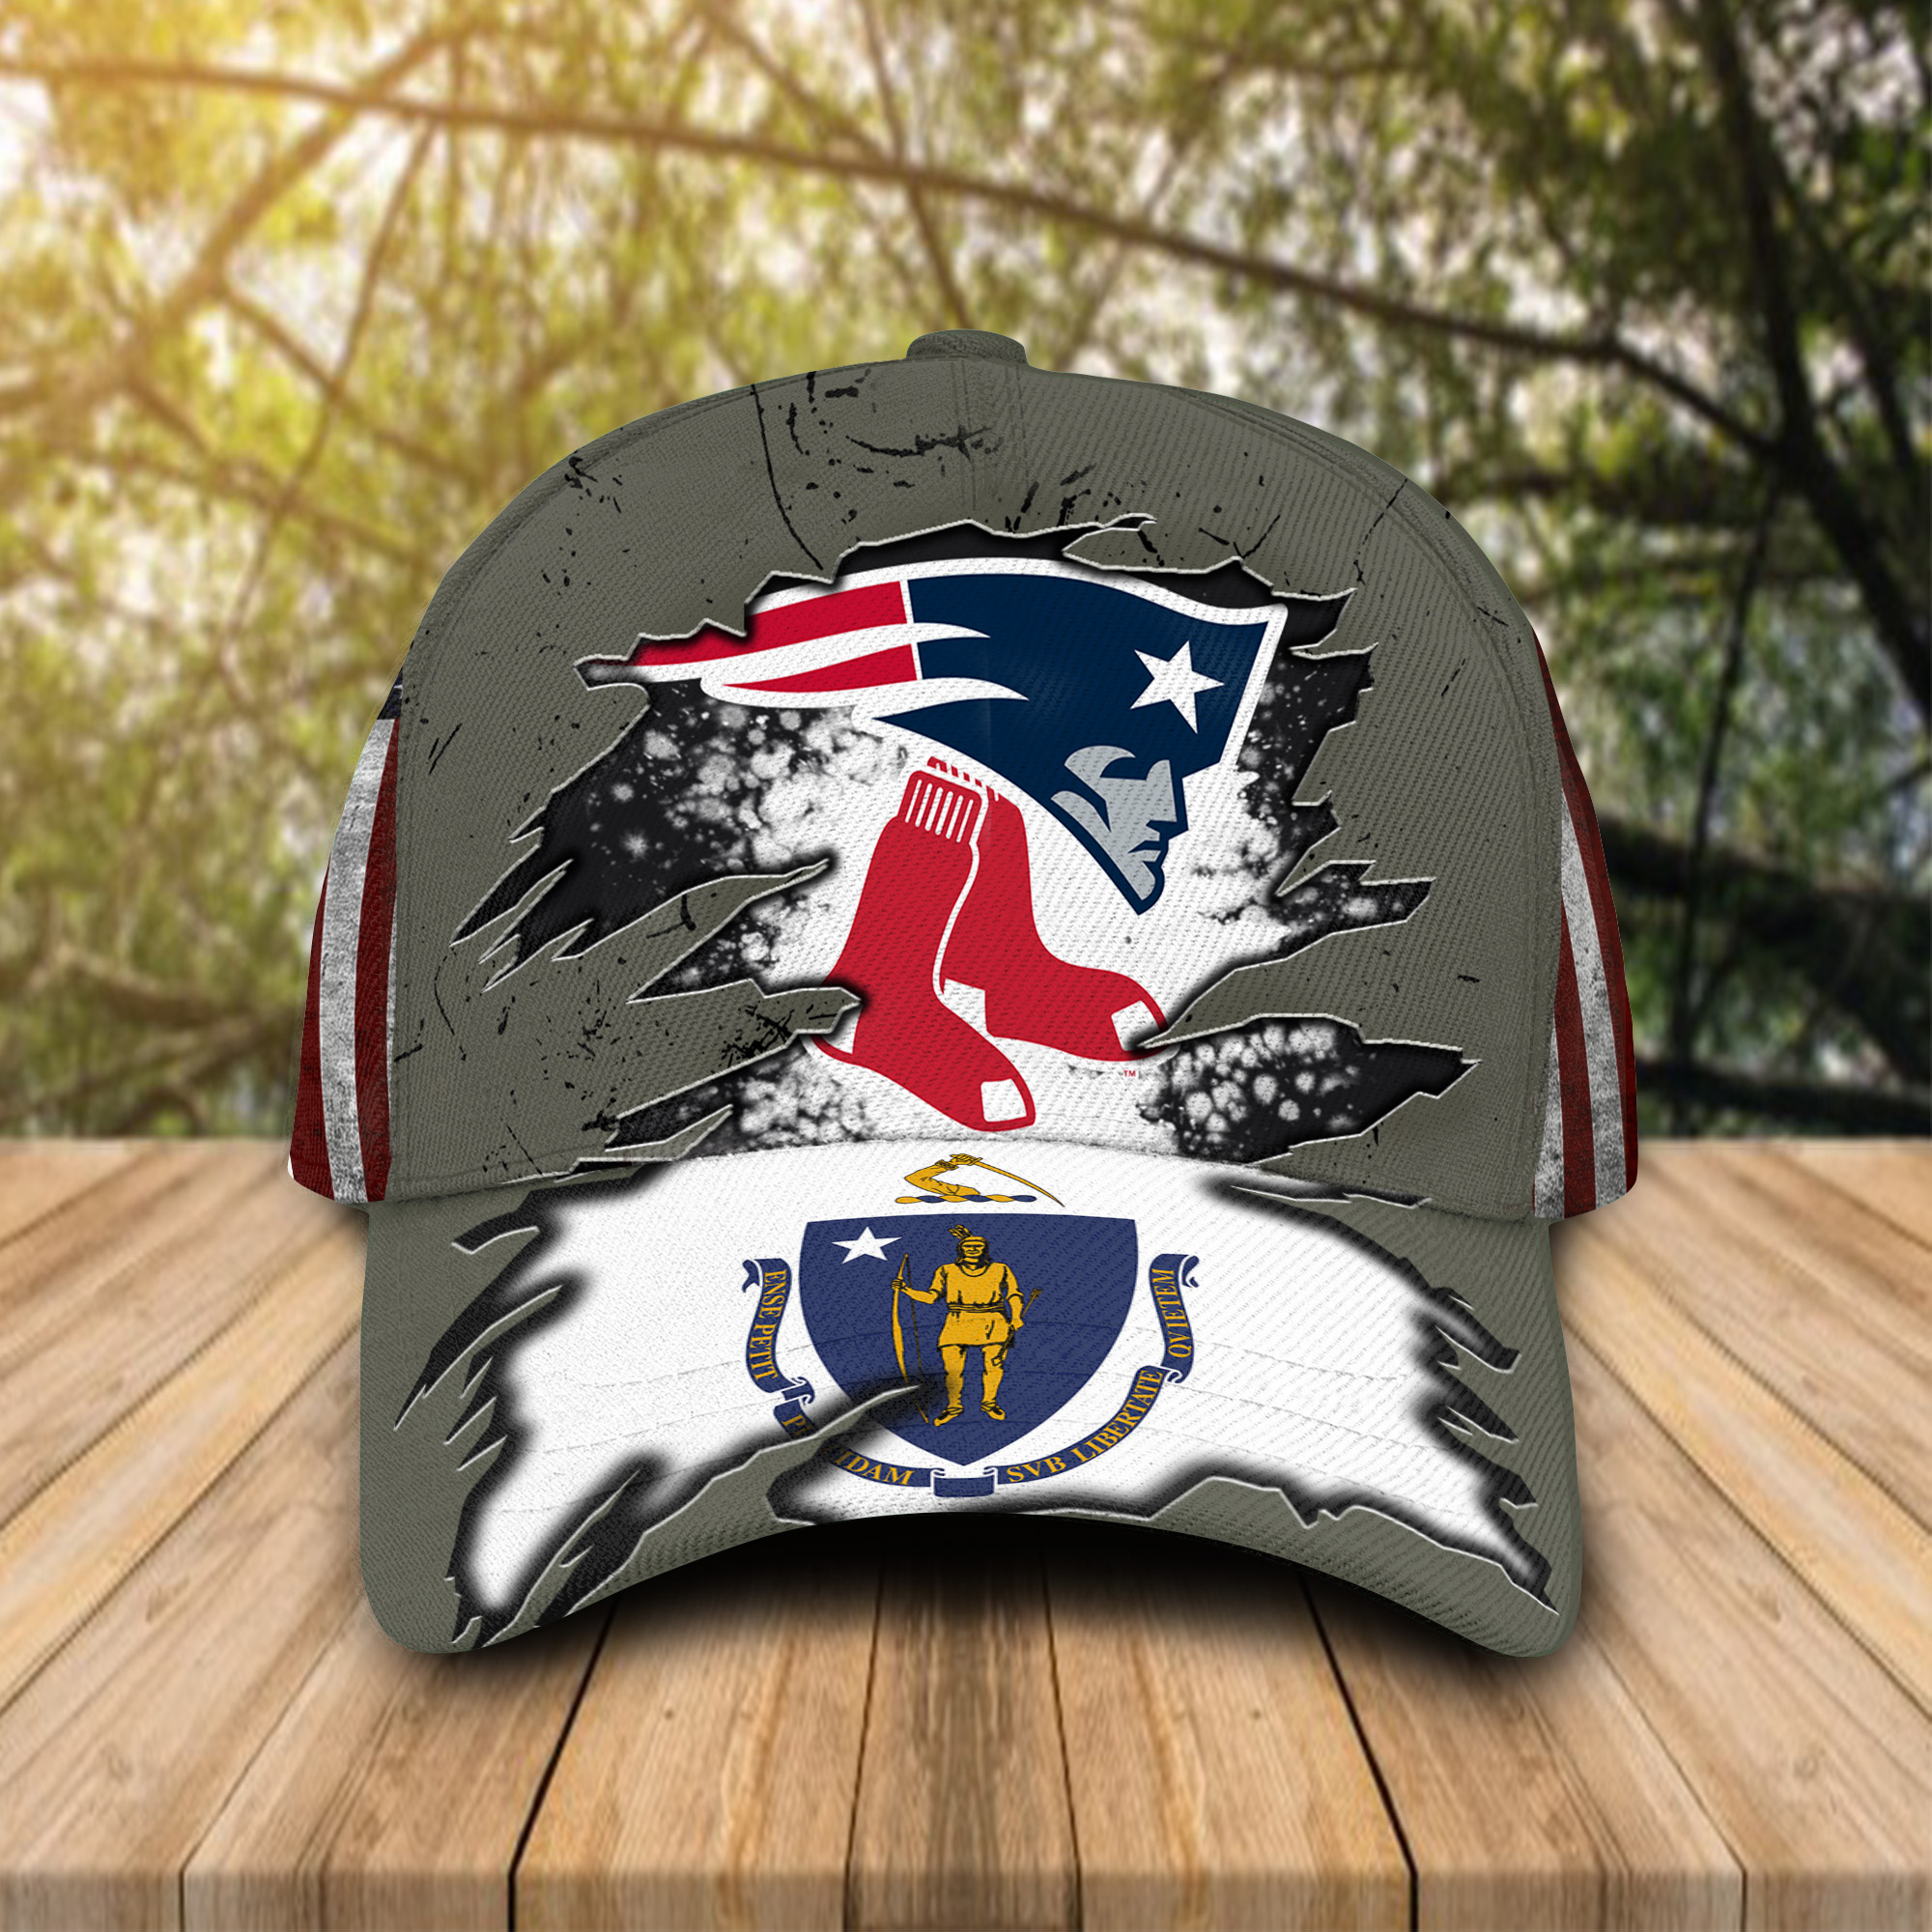 New England Patriots And Boston Red Sox Caps & Hats – Hothot 121021